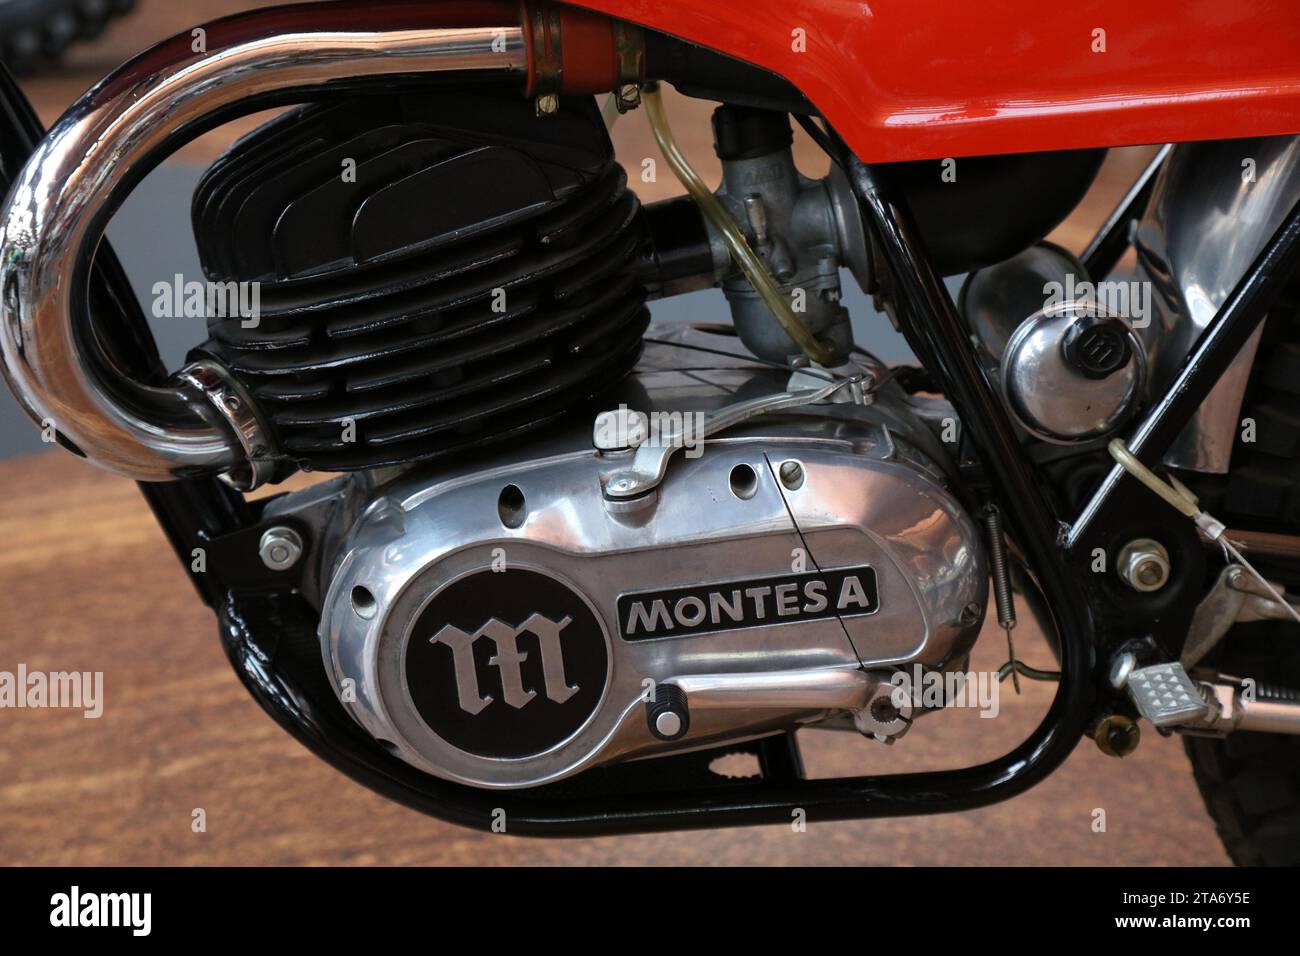 CATALONIA, SPAIN - OCTOBER 6, 2021: Close-up of the engine of Montesa historic collectible motorcycle made in Barcelona, Spain. Stock Photo